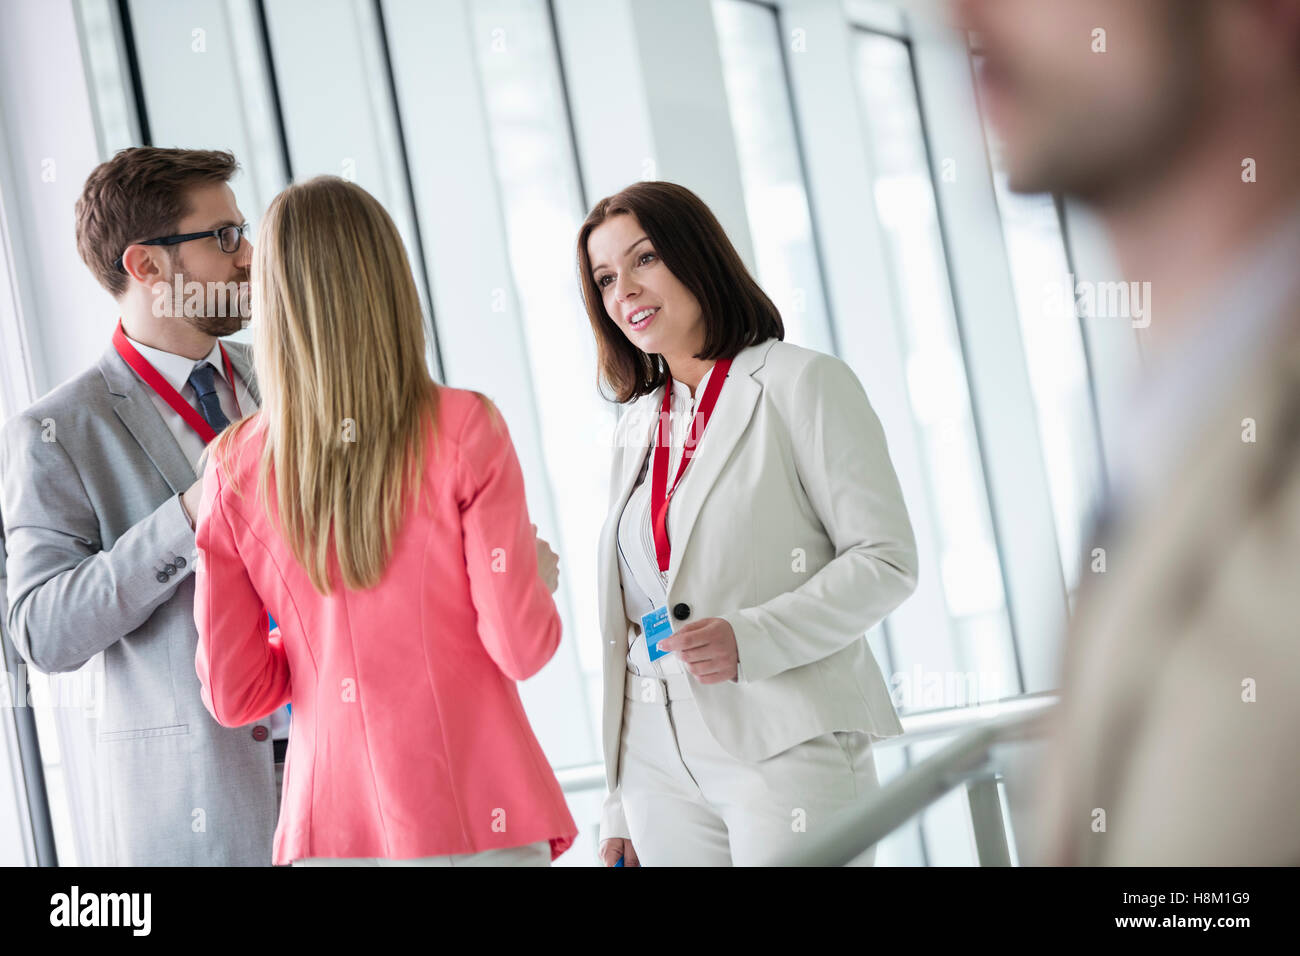 Confident business people discussing in brightly lit convention center Stock Photo